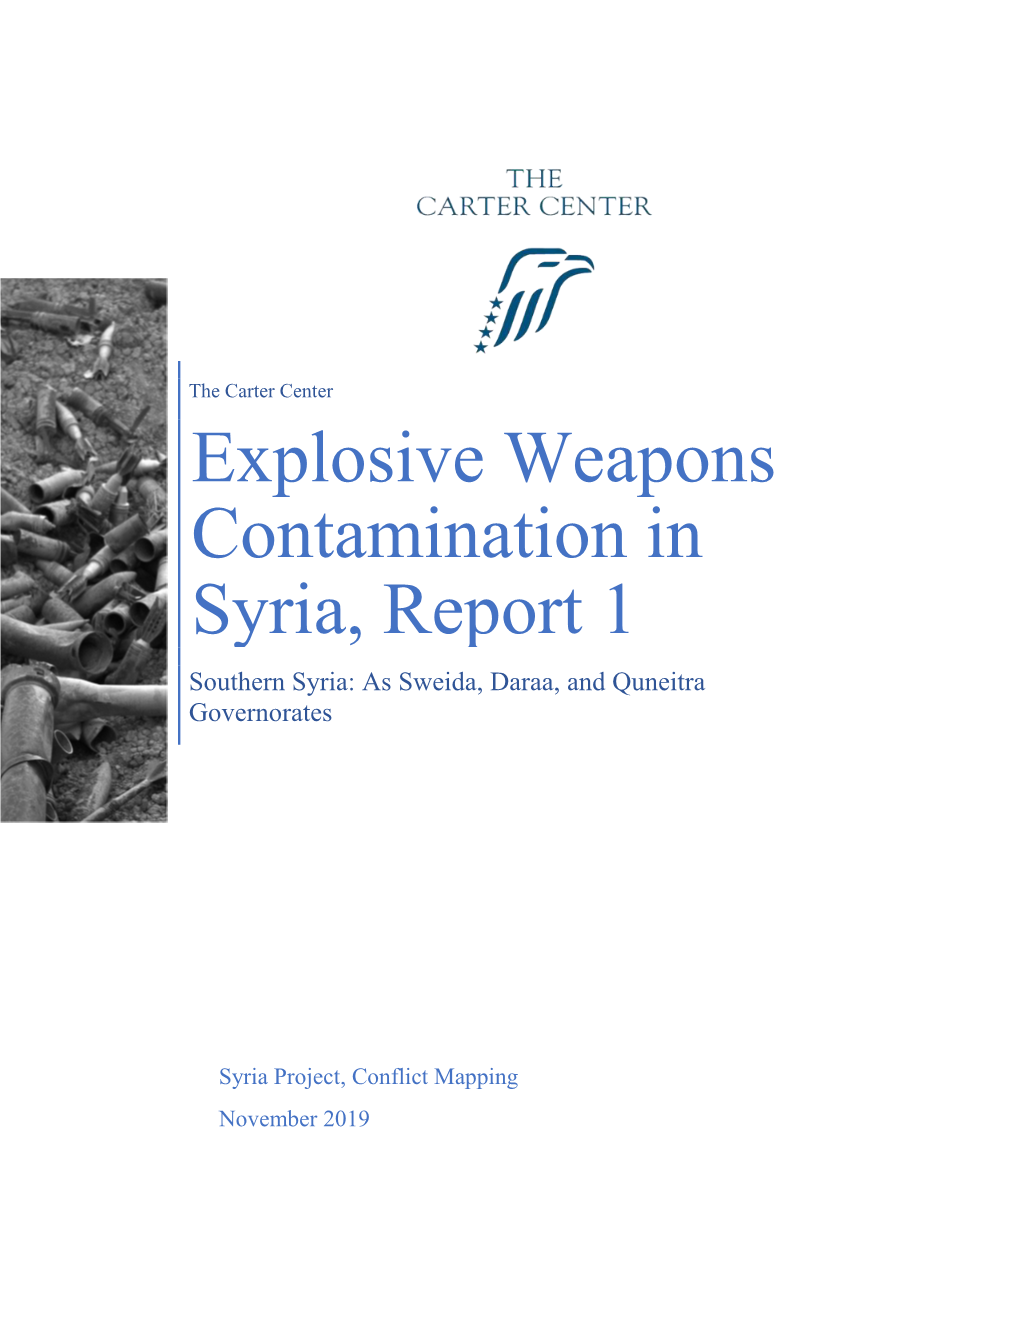 Explosive Weapons Contamination in Syria, Report 1 Southern Syria: As Sweida, Daraa, and Quneitra Governorates